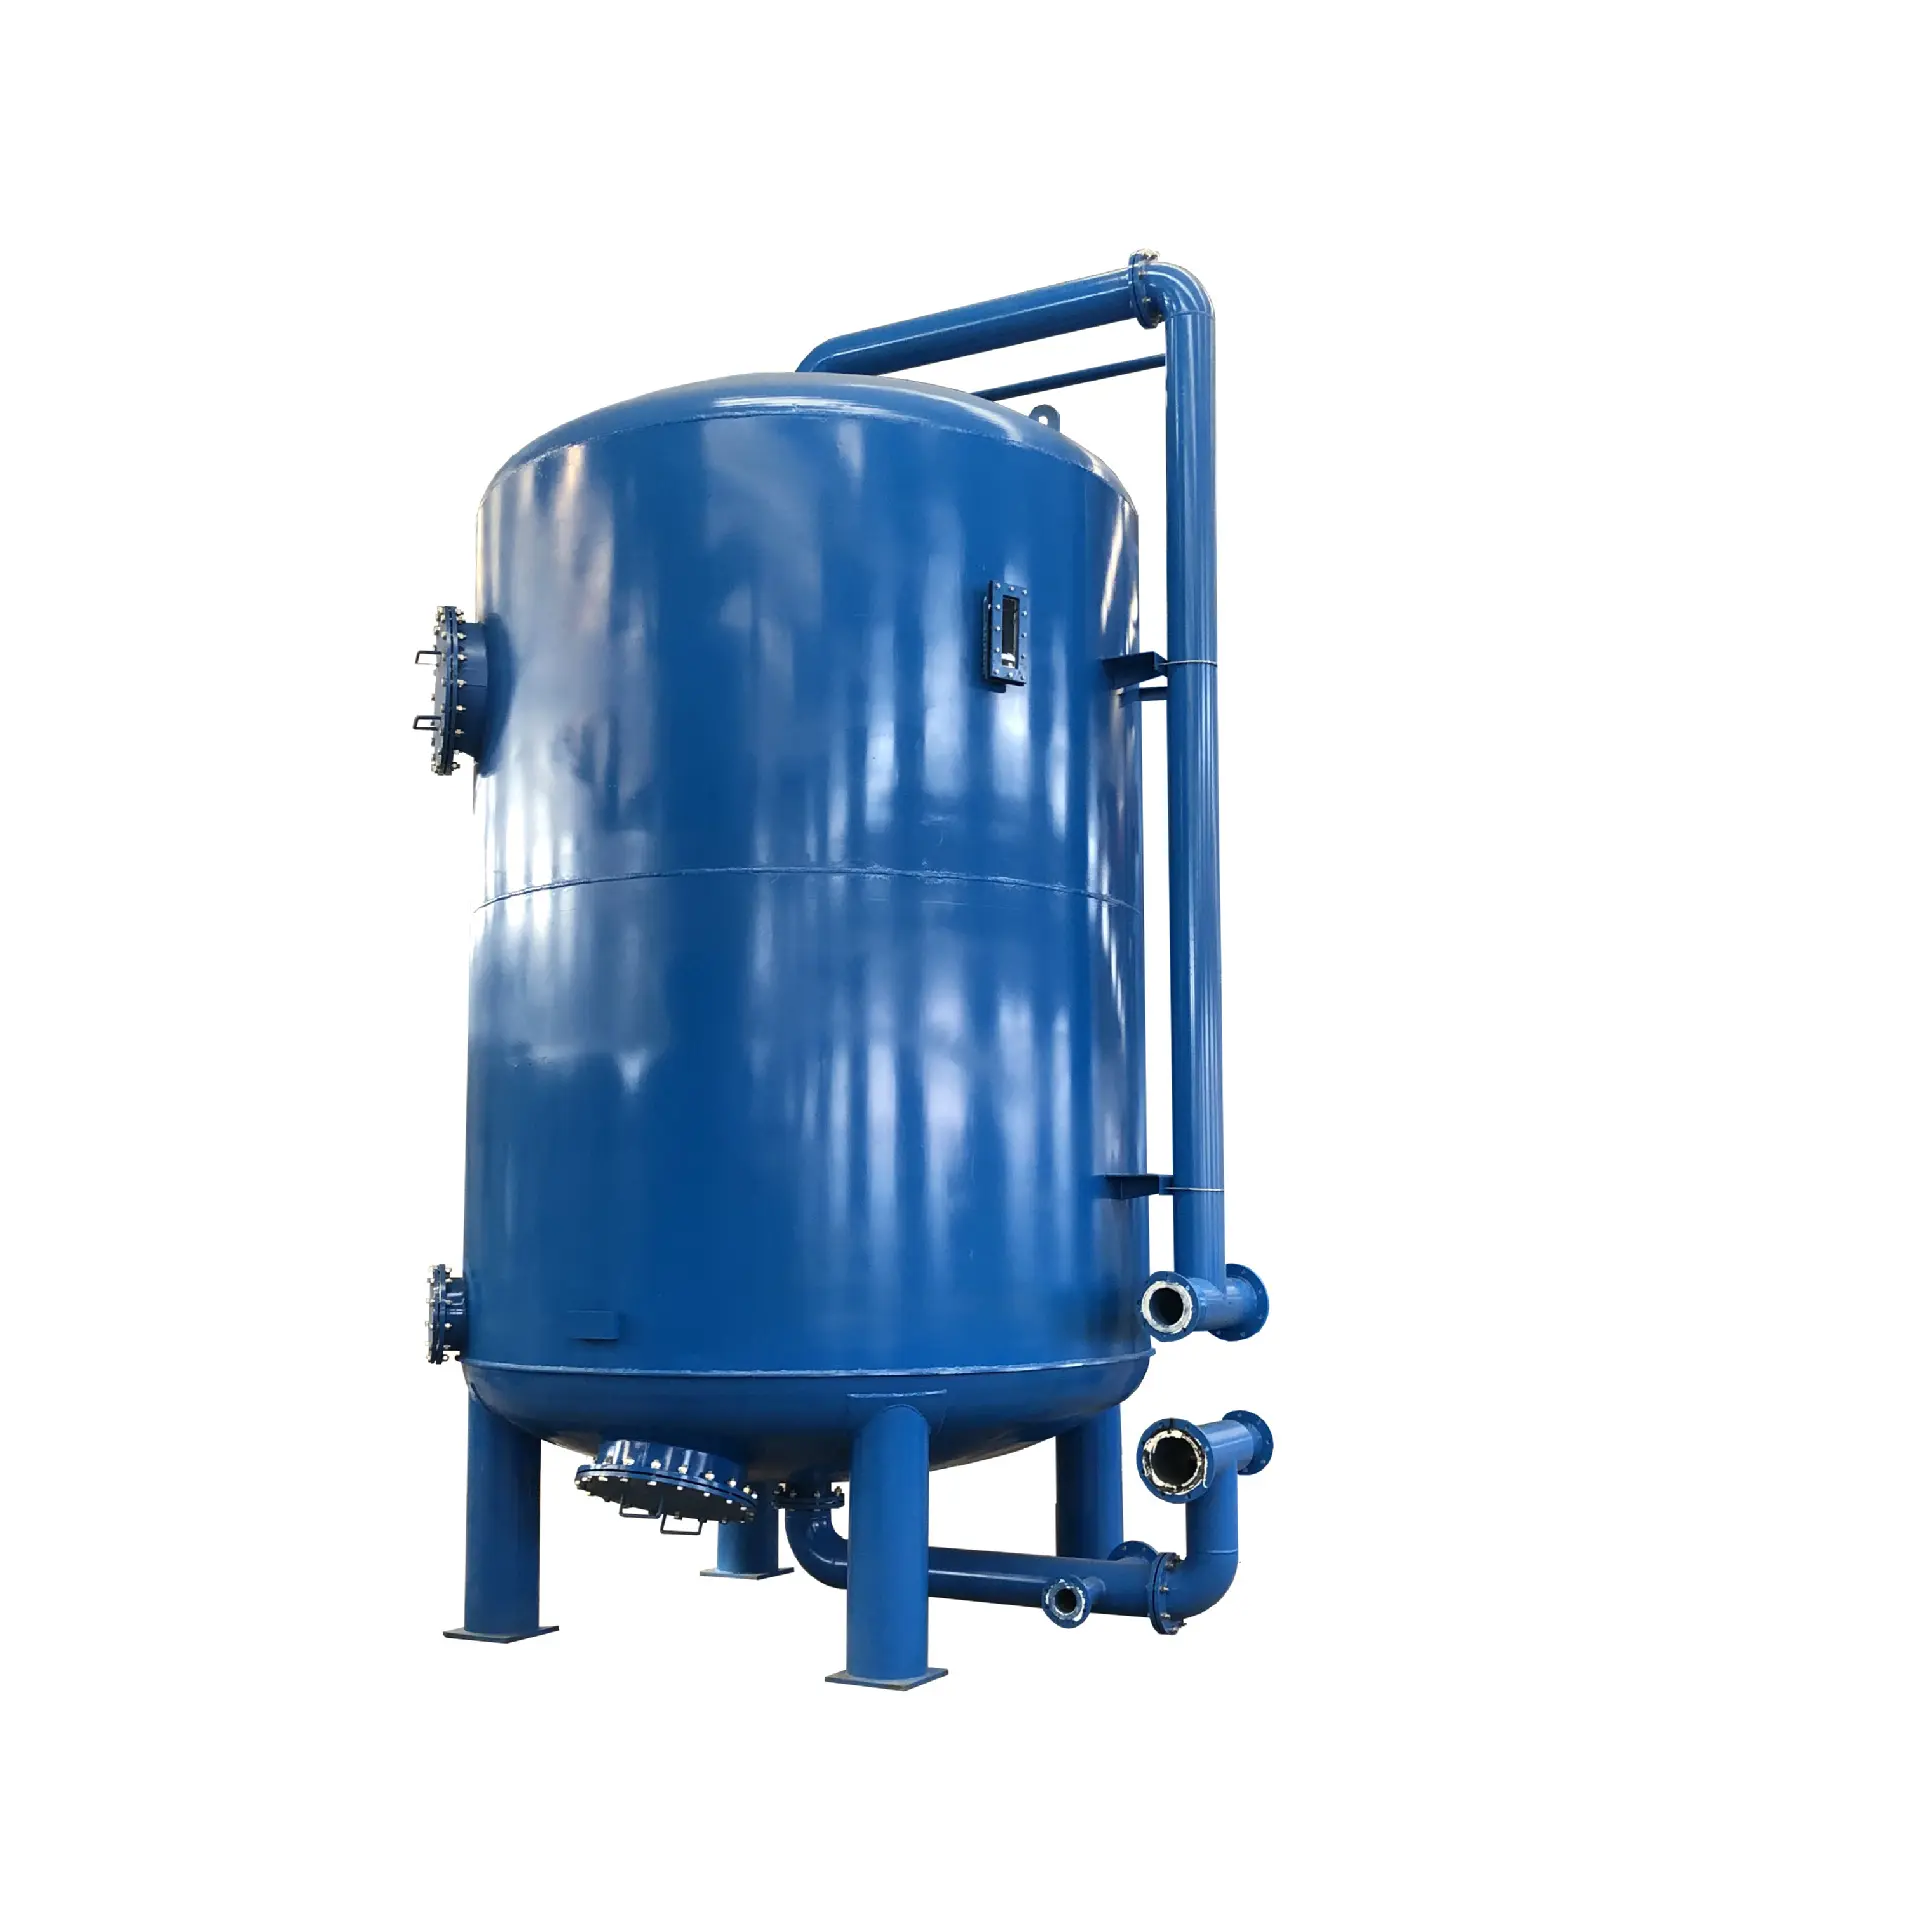 Factory Price Automatic Backwash Activated Carbon Water Filter / Quartz Sand Filter / Multimedia Filter Tank